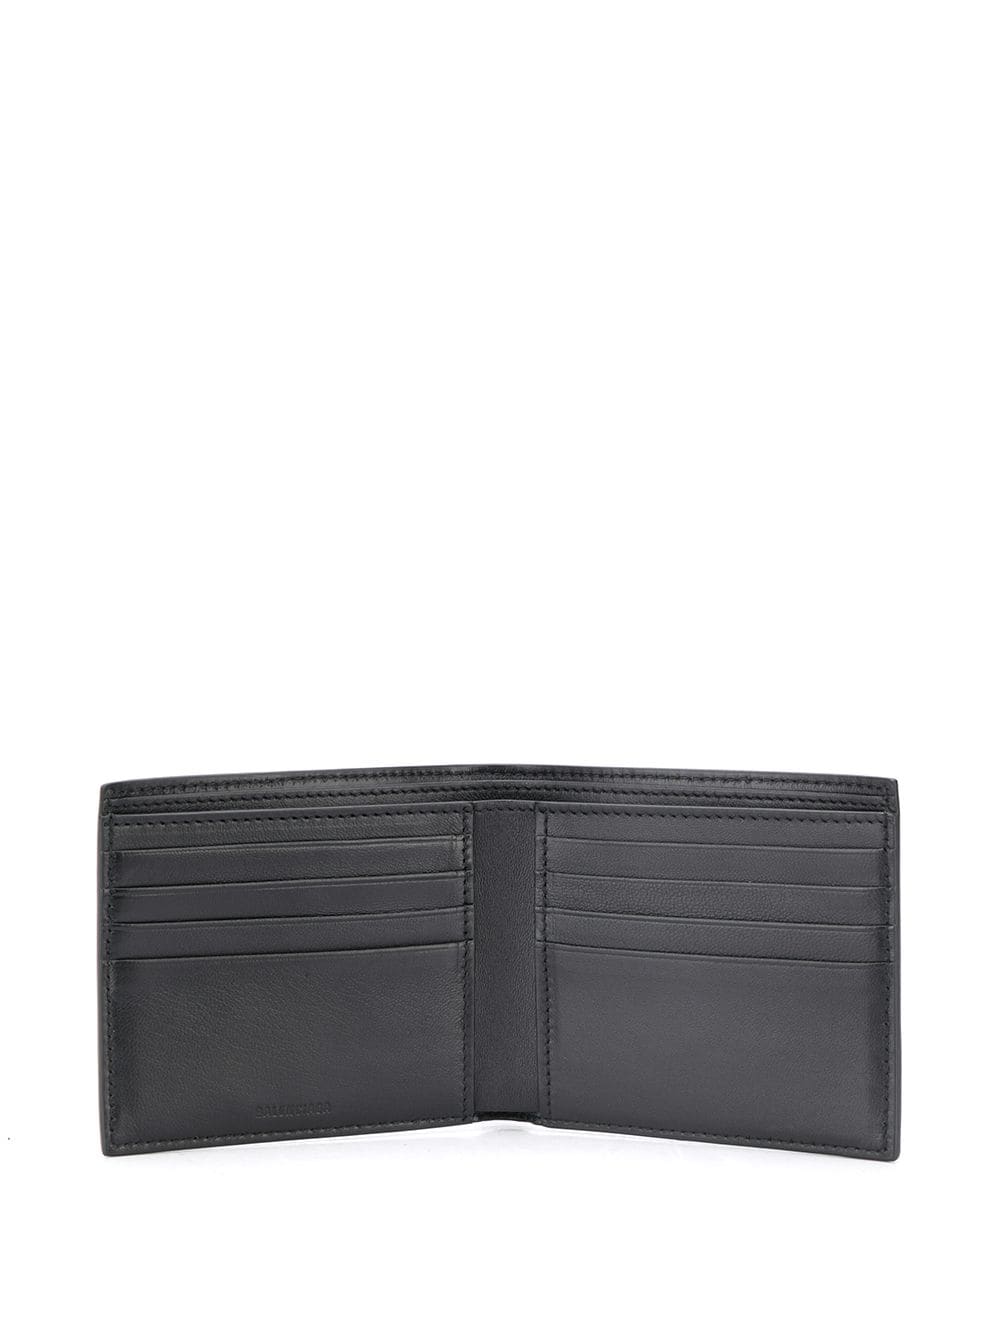 Black/white leather square folded wallet